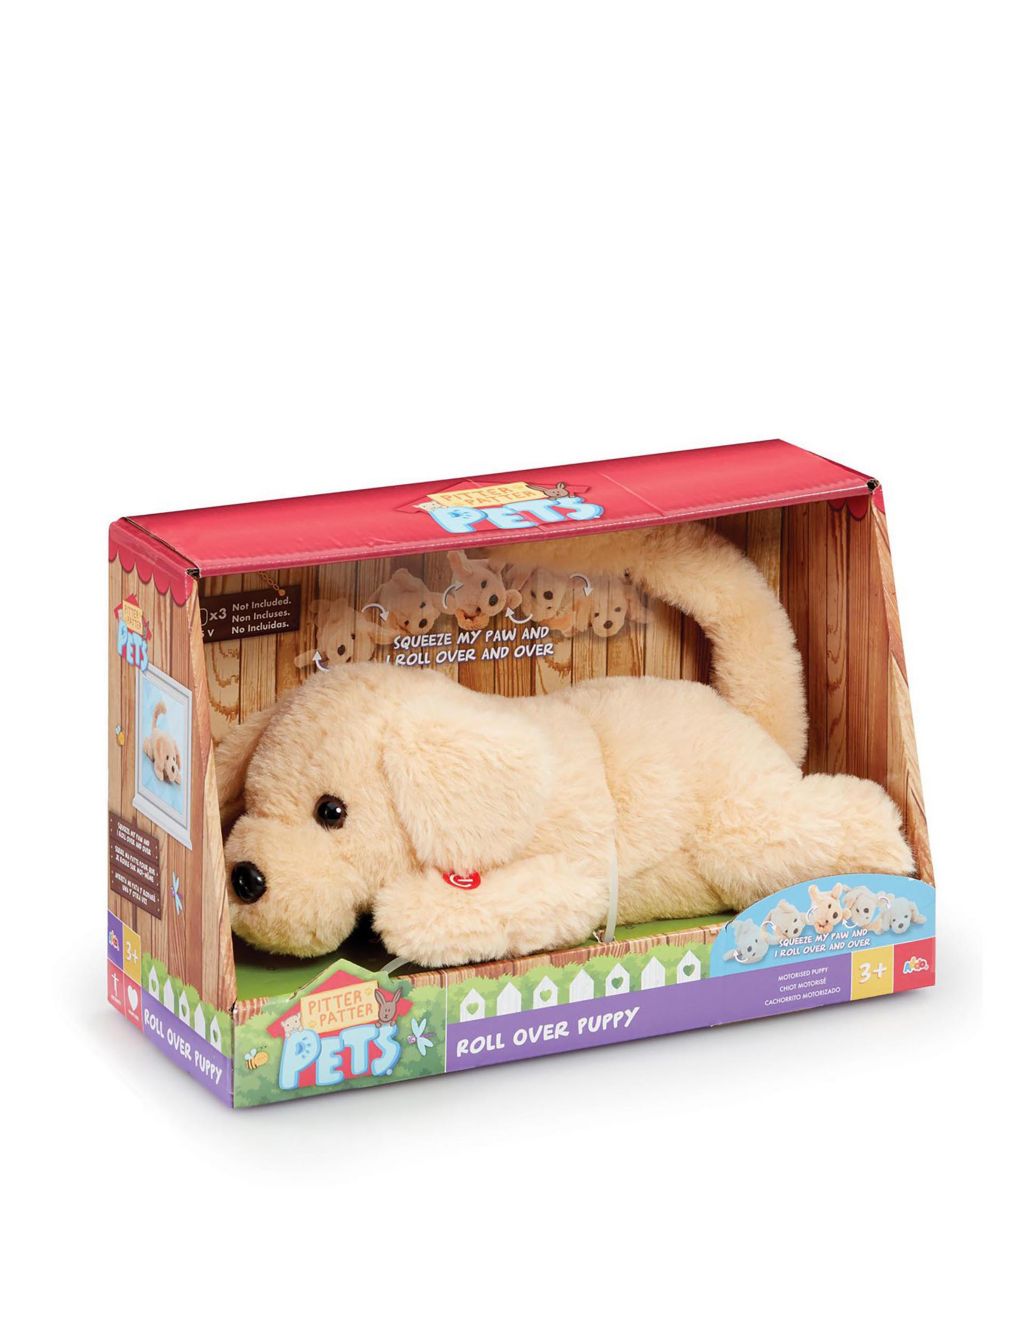 Roll Over Puppy Soft Toy (3-6 Yrs) image 1